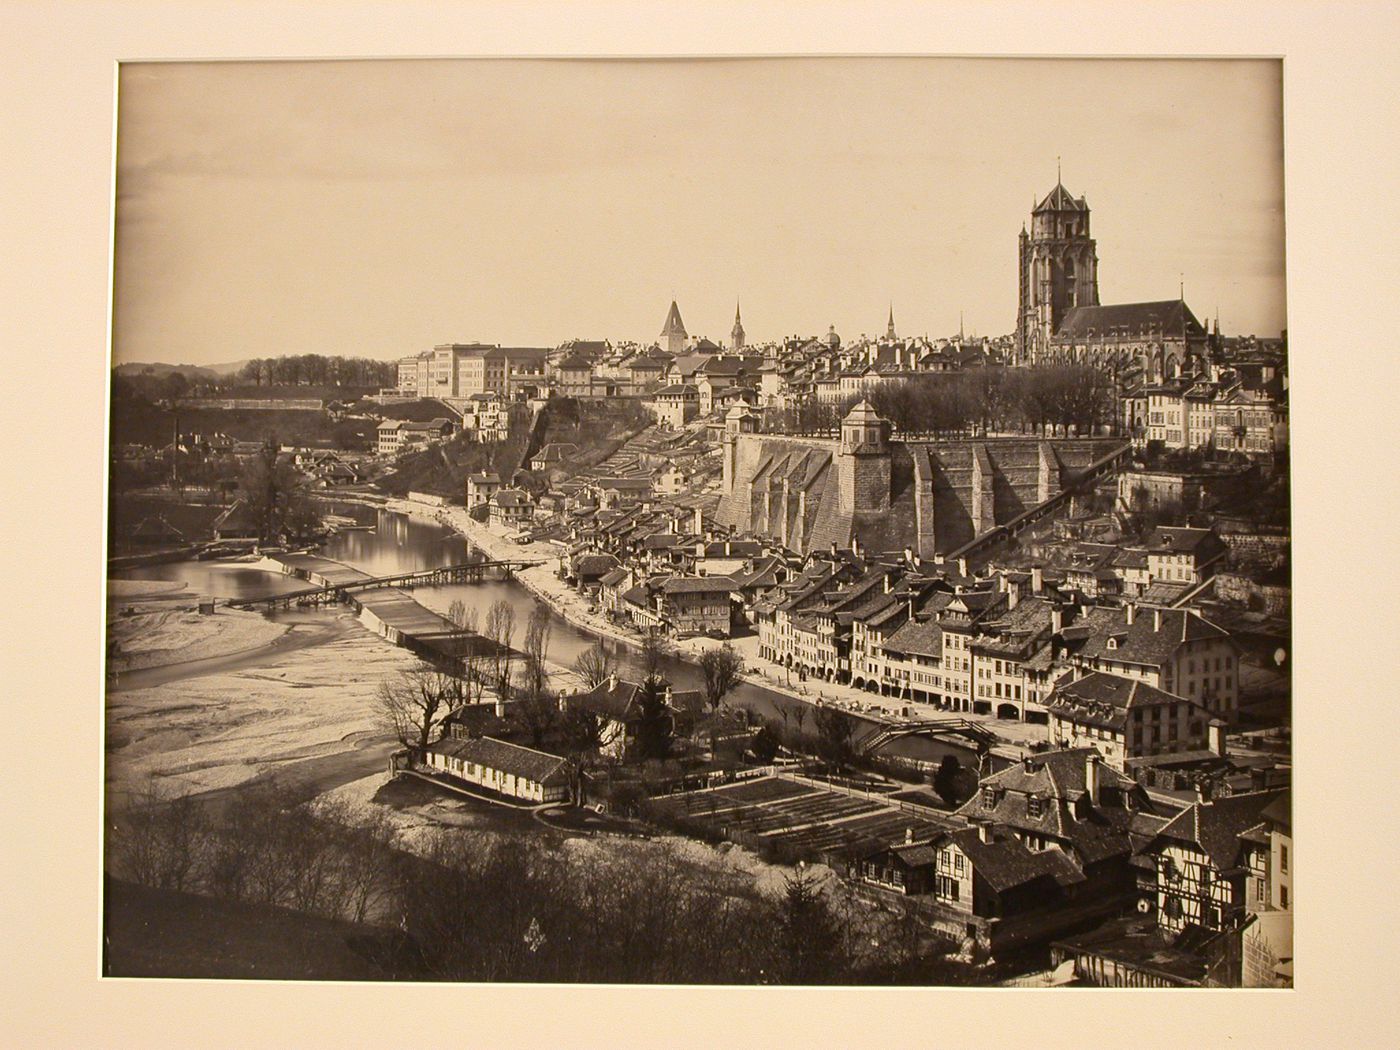 General view of city and river, from distant, elevated viewpoint, Bern, Switzerland